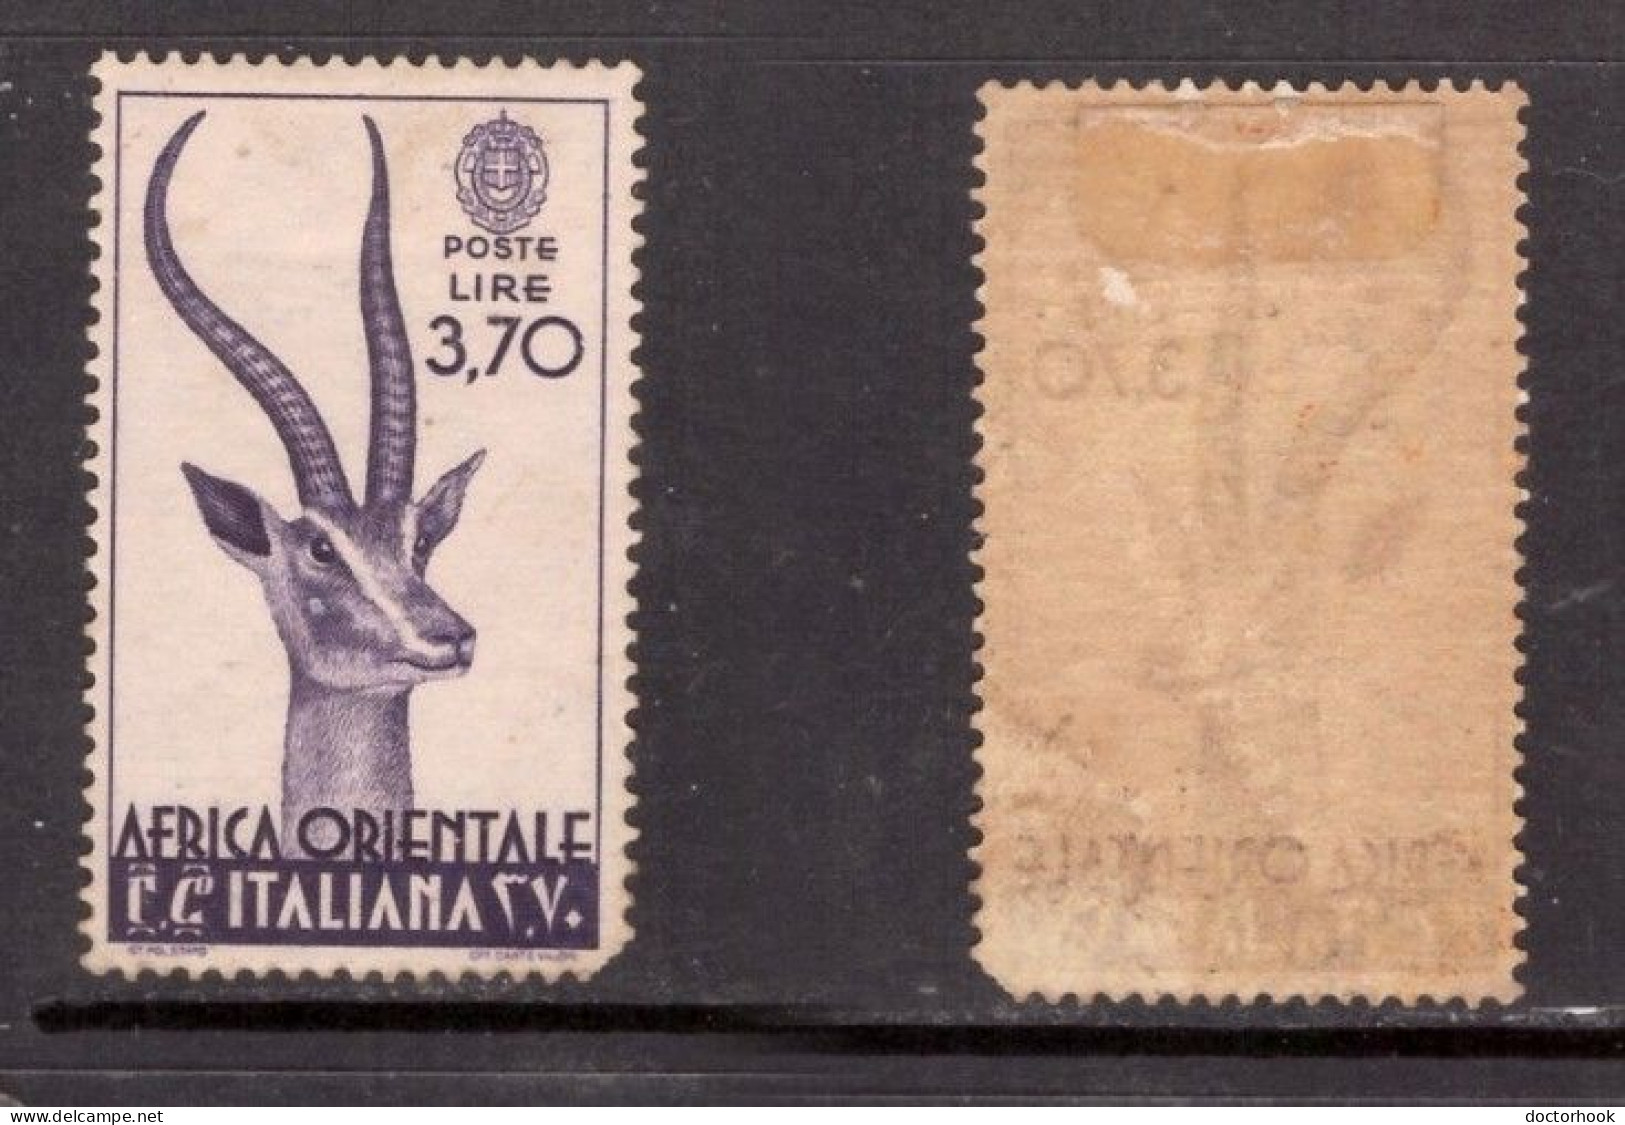 ITALIAN EAST AFRICA   Scott # 17* MINT HINGED (CONDITION AS PER SCAN) (Stamp Scan # 957-1) - Oost-Afrika